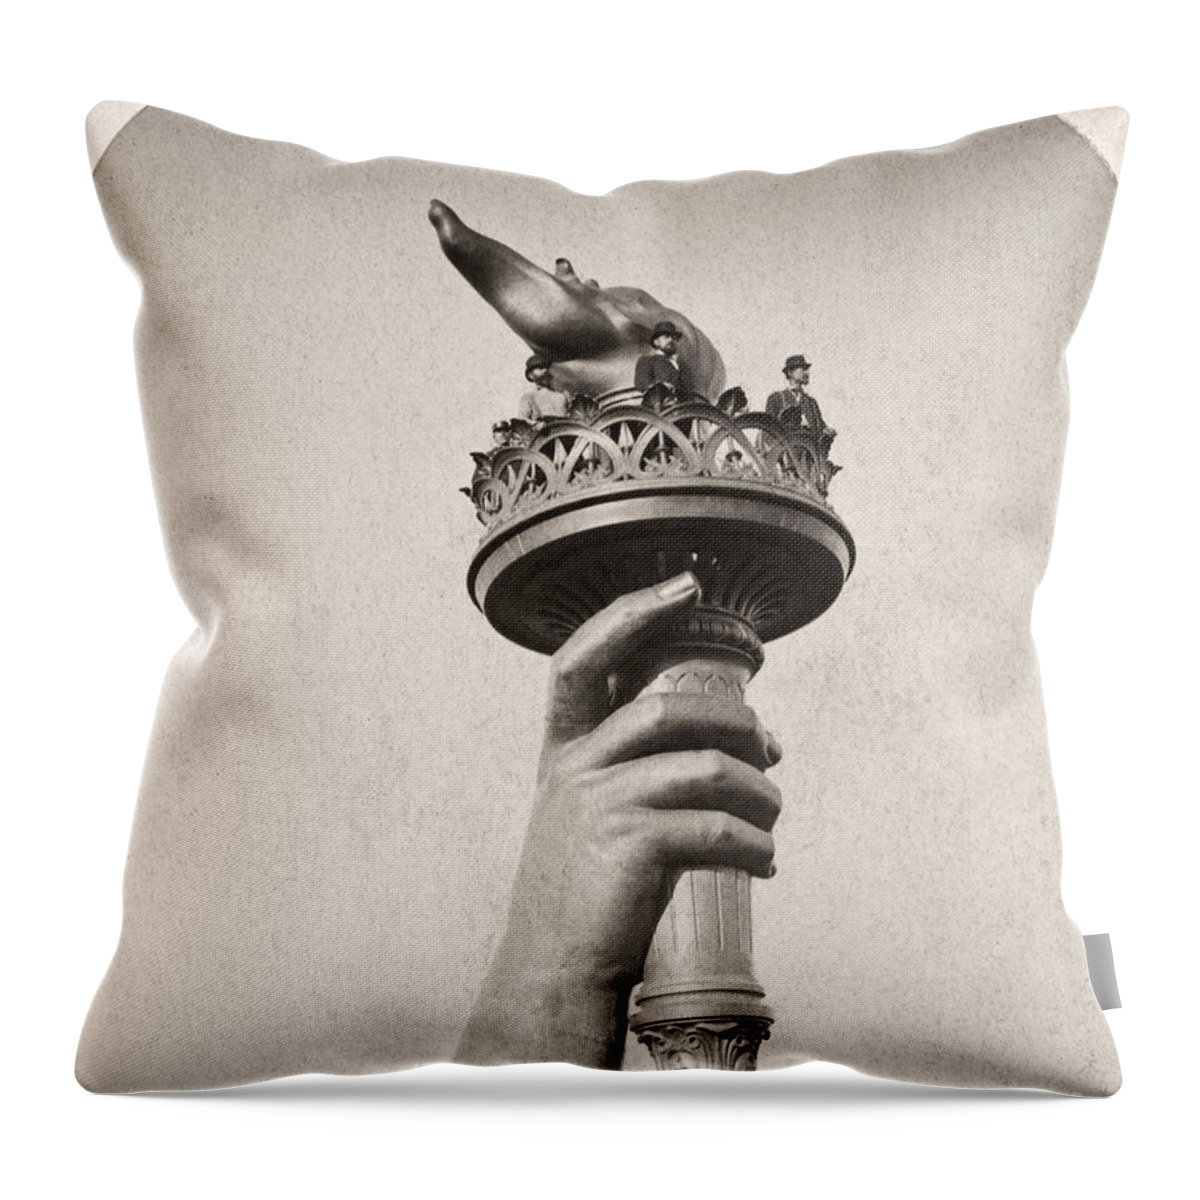 1876 Throw Pillow featuring the photograph Statue Of Liberty, 1876 #1 by Granger